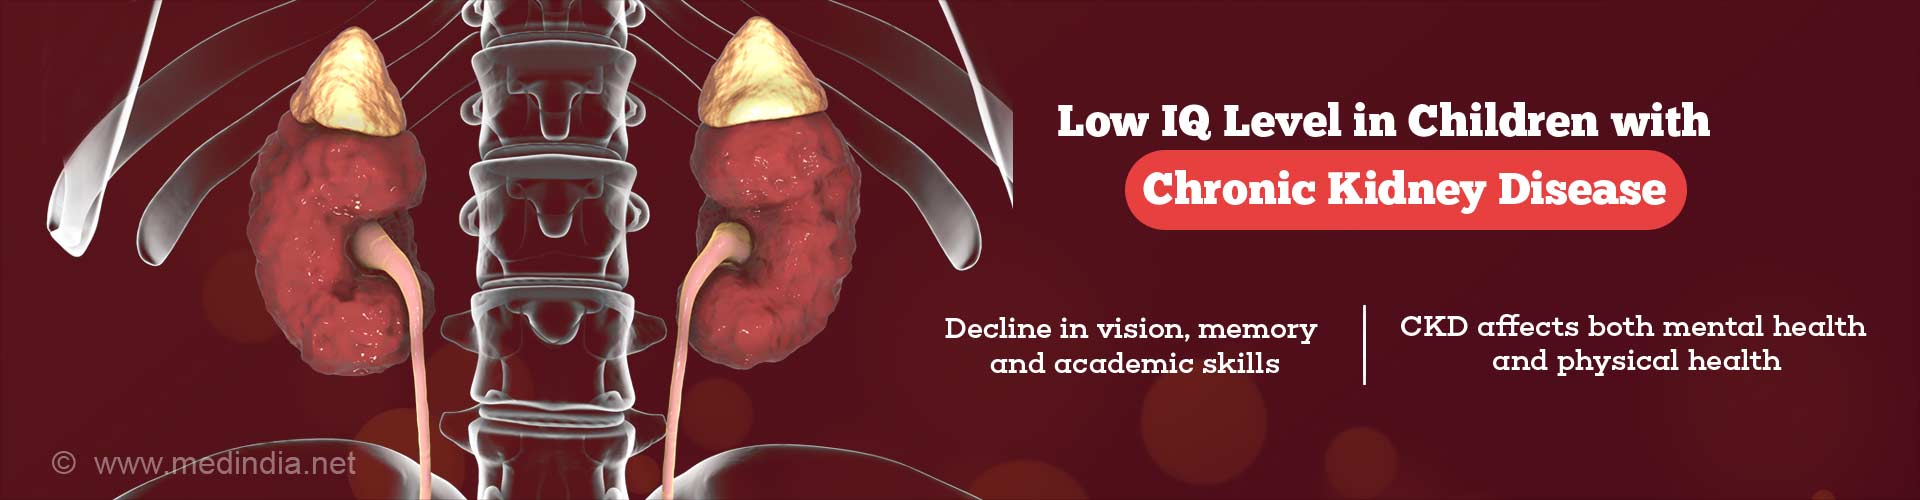 Low IQ level in children with chronic kidney disease
- decline in vision, memory and academic skills
- CKD affects both mental health and physical health